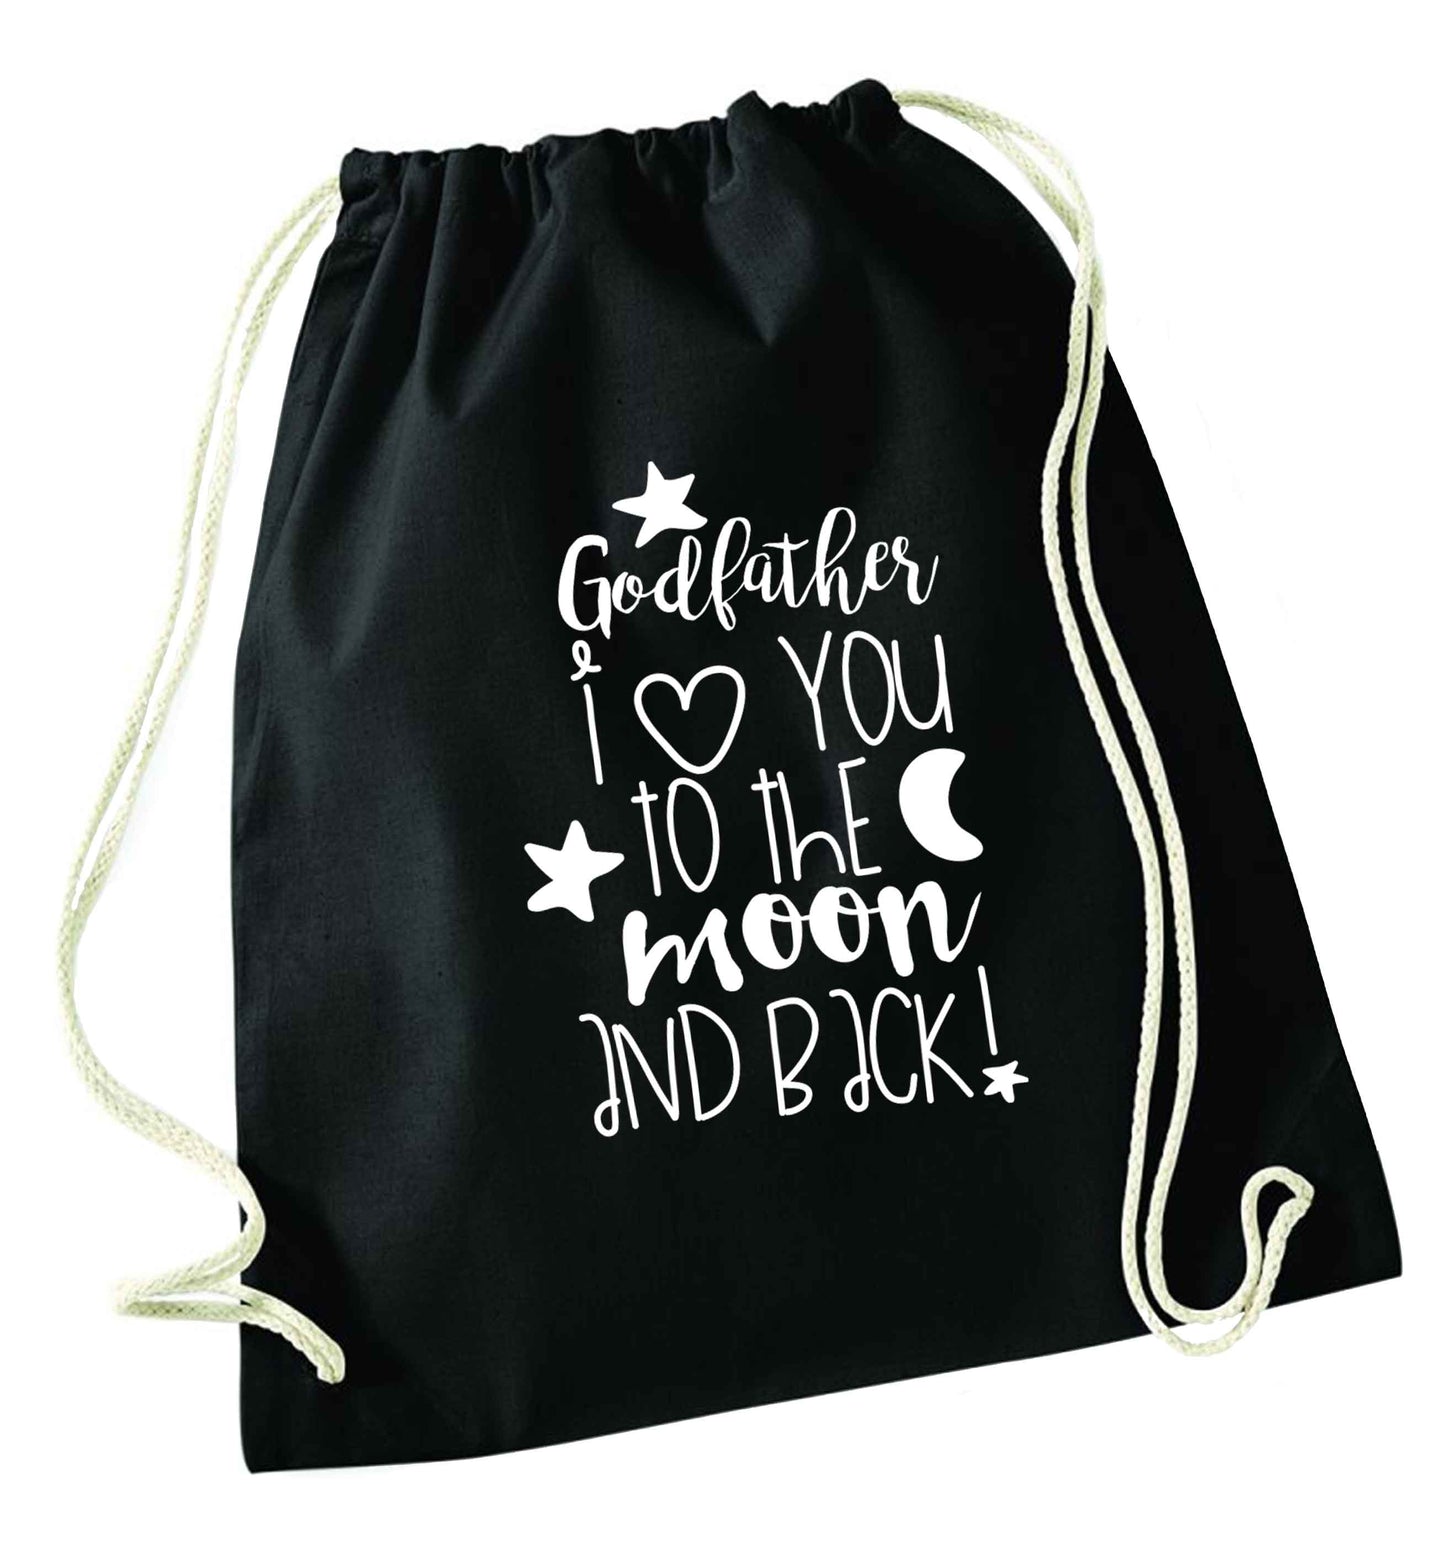 Godfather I love you to the moon and back black drawstring bag